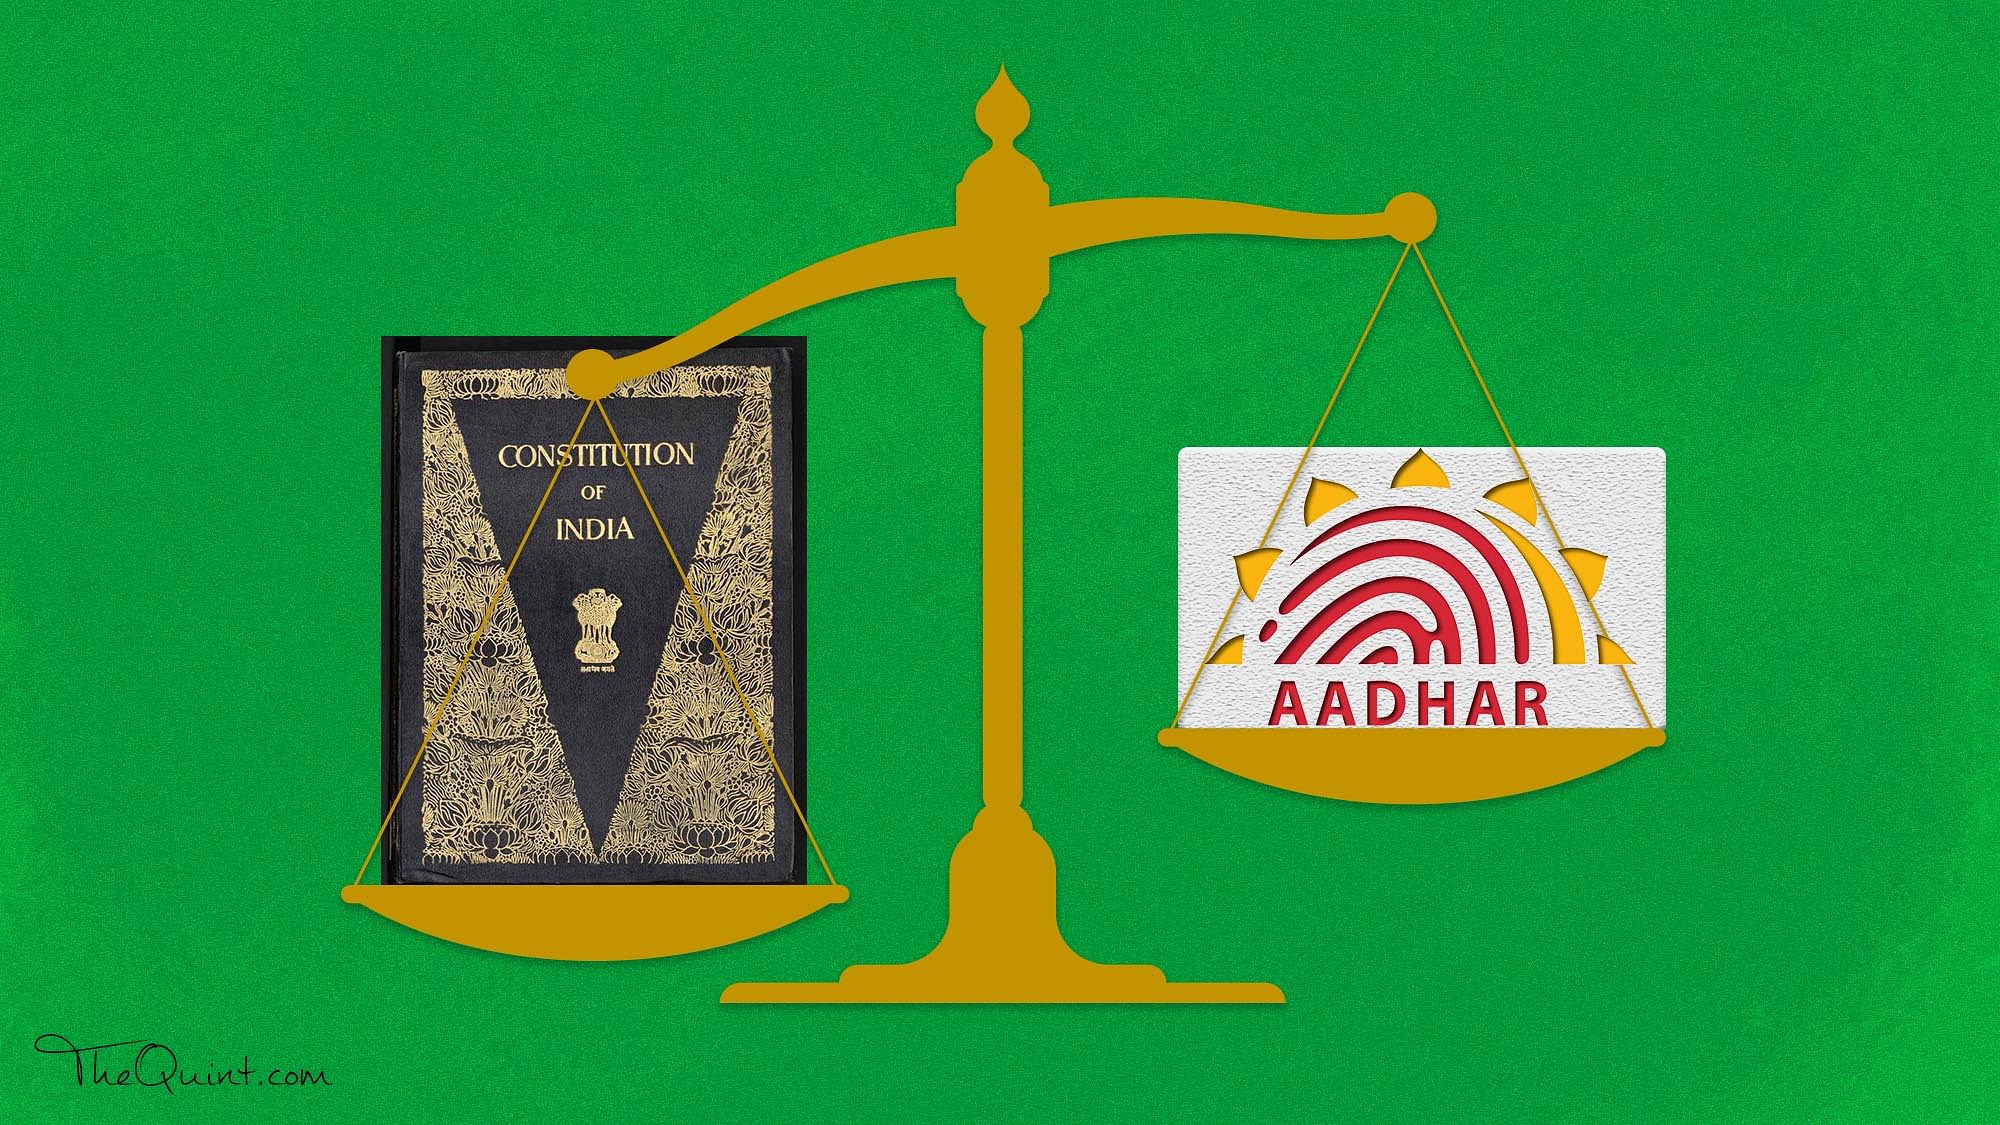 Right to privacy is central to constitutionality of the Aadhaar programme.